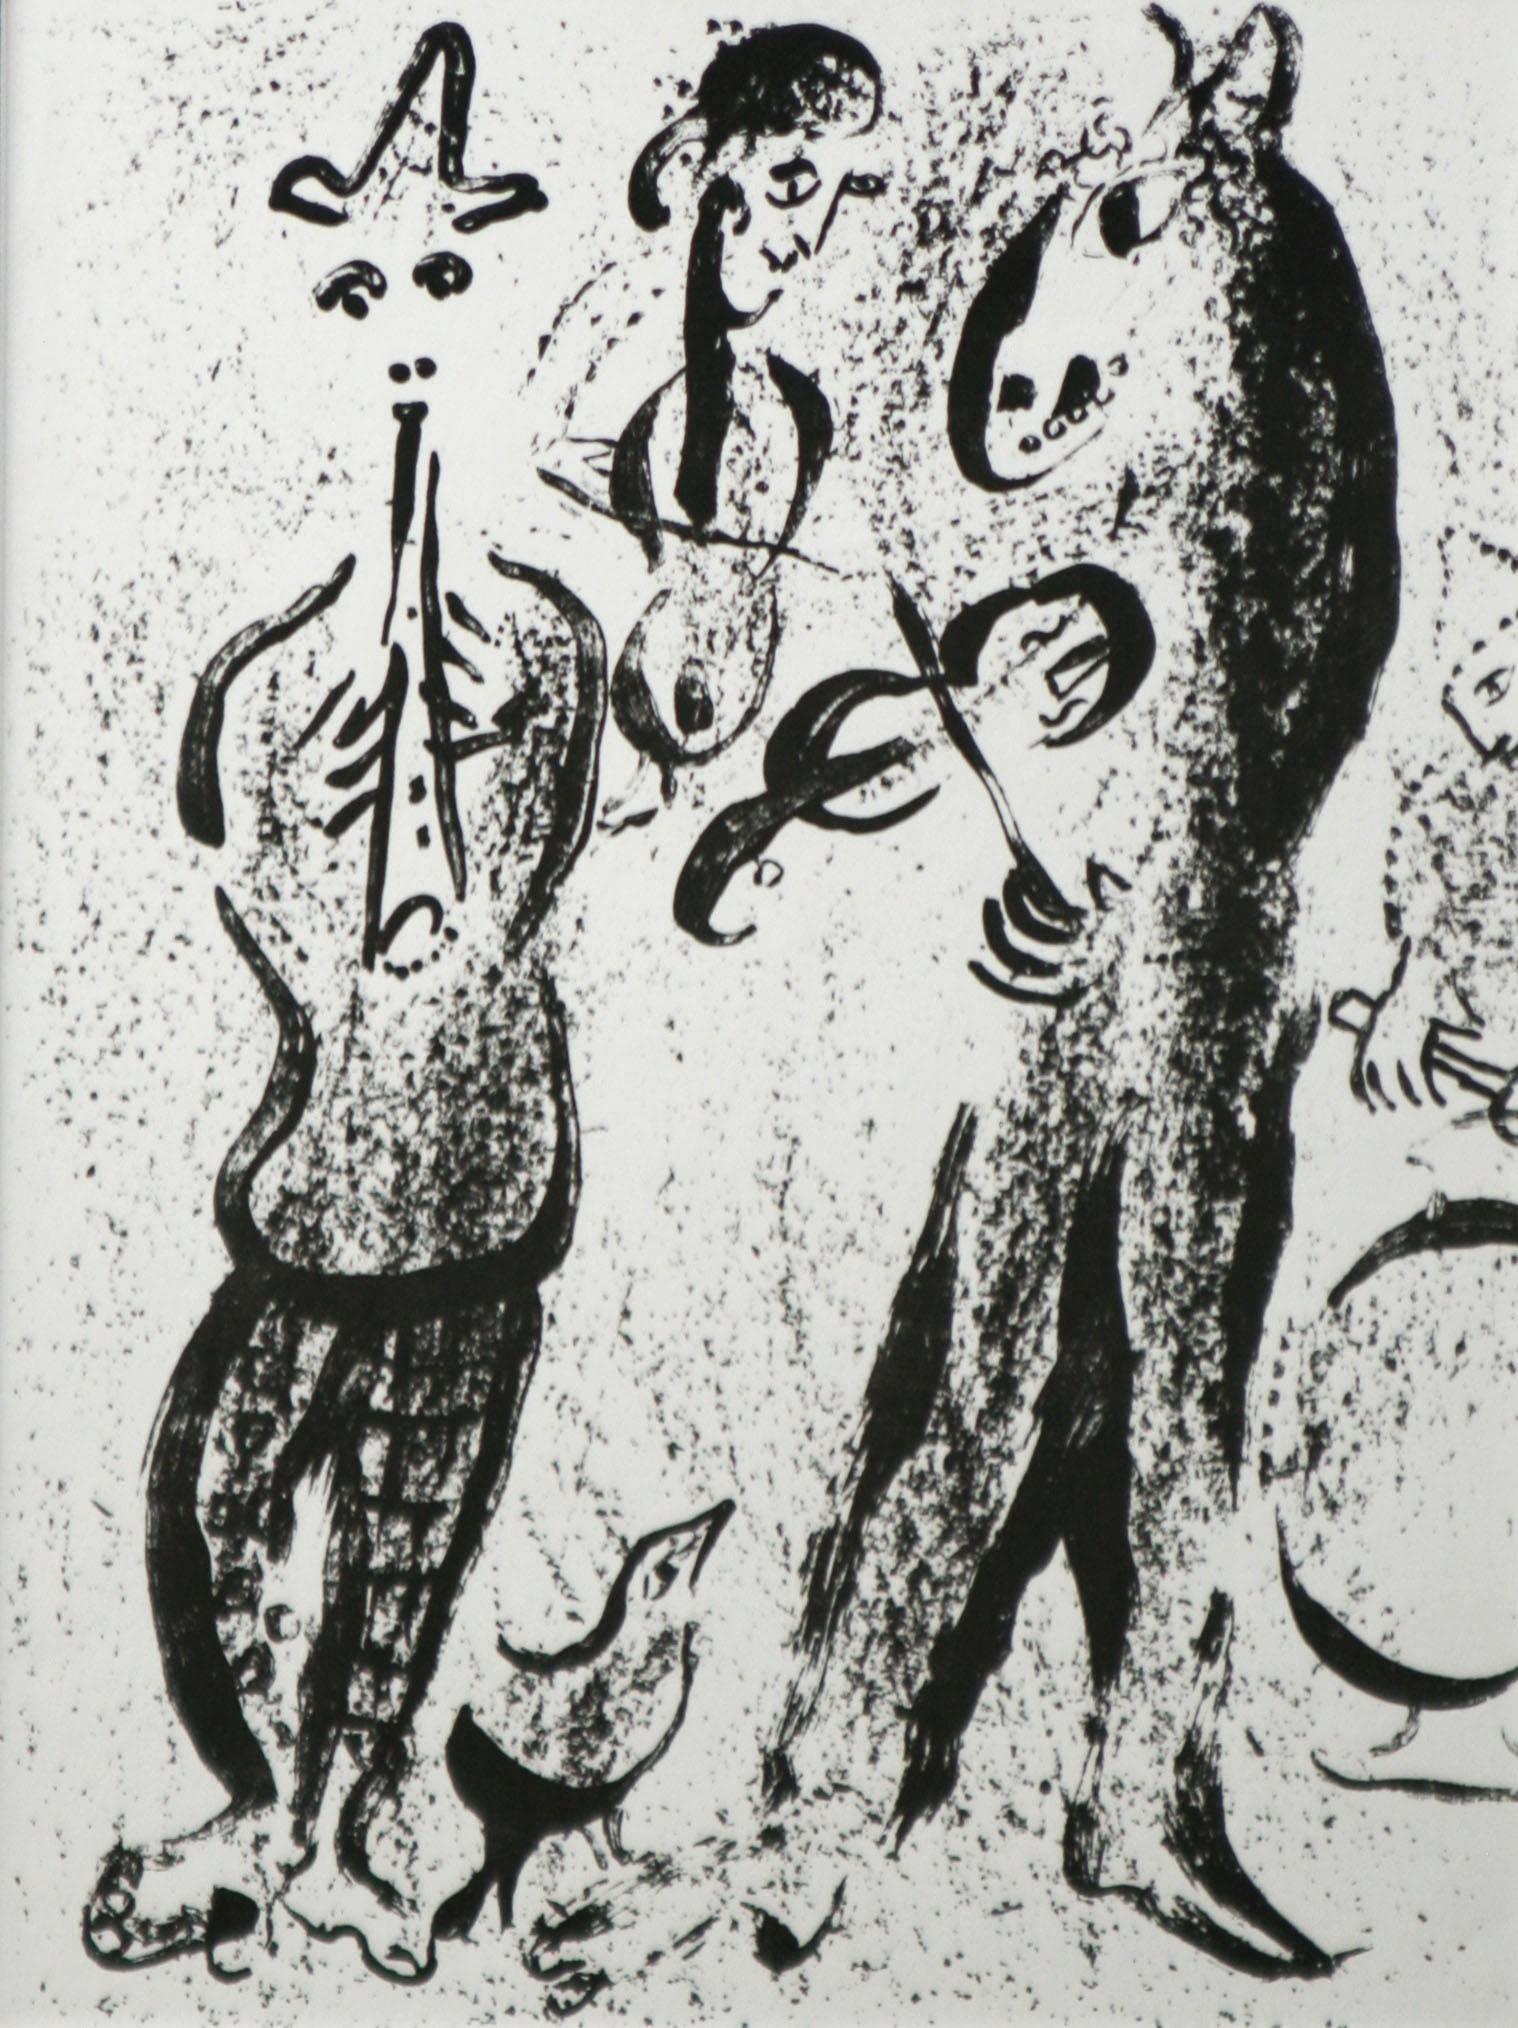 Marc Chagall Figurative Print - Itinerant Musicians Chagall original lithograph printed by Mourlot 1963